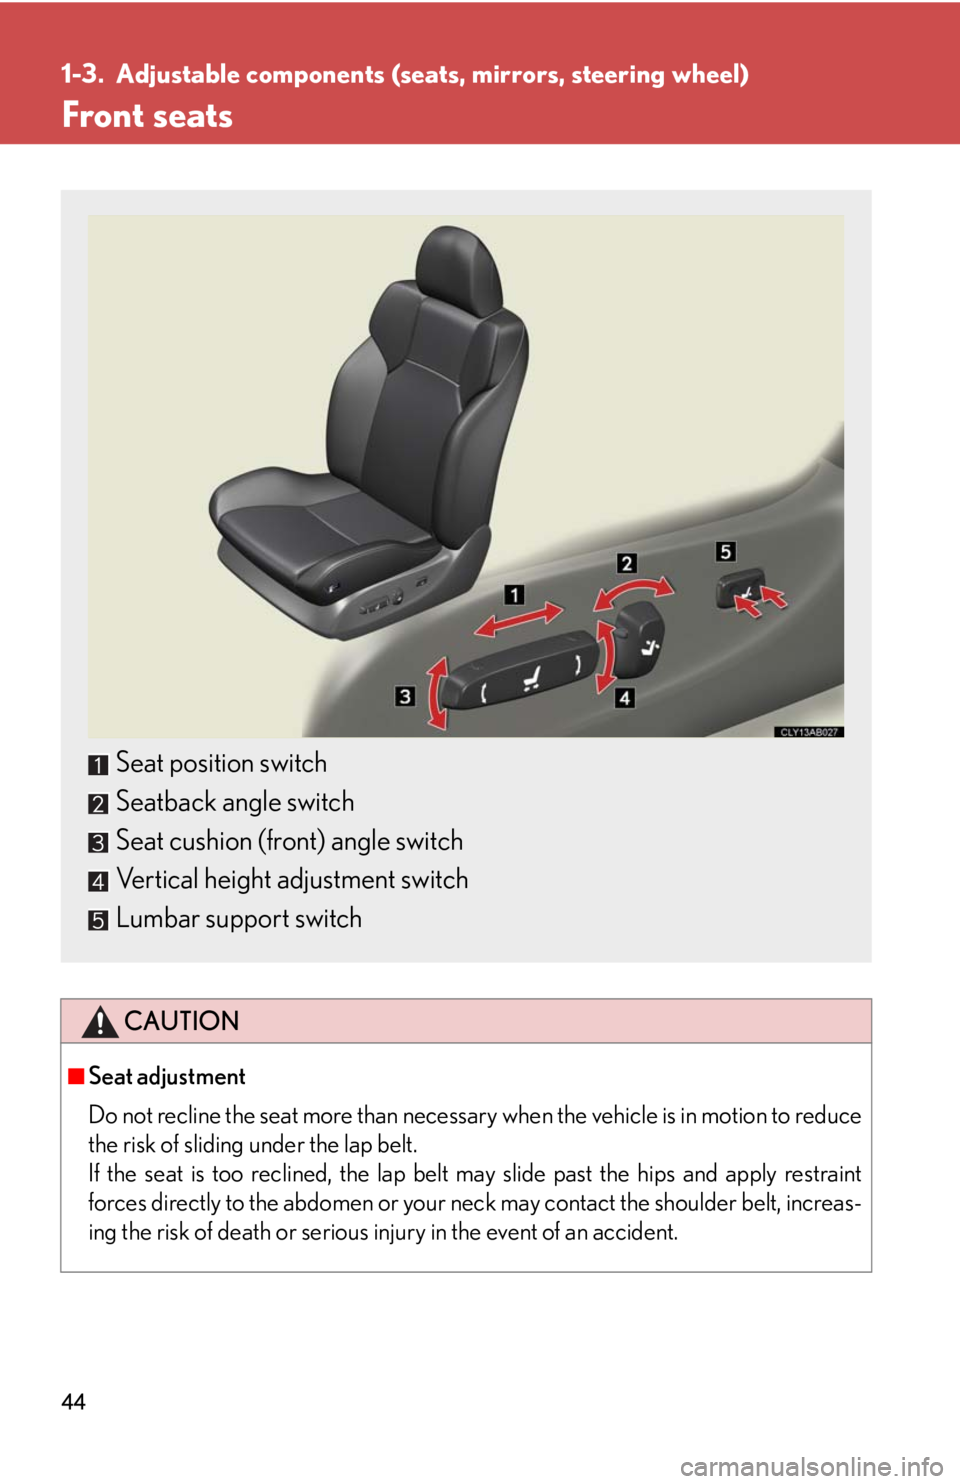 Lexus IS F 2008  Do-It-Yourself Maintenance / 44
1-3. Adjustable components (seats, mirrors, steering wheel)
Front seats
CAUTION
■Seat adjustment
Do not recline the seat more than necessary when the vehicle is in motion to reduce
the risk of sl